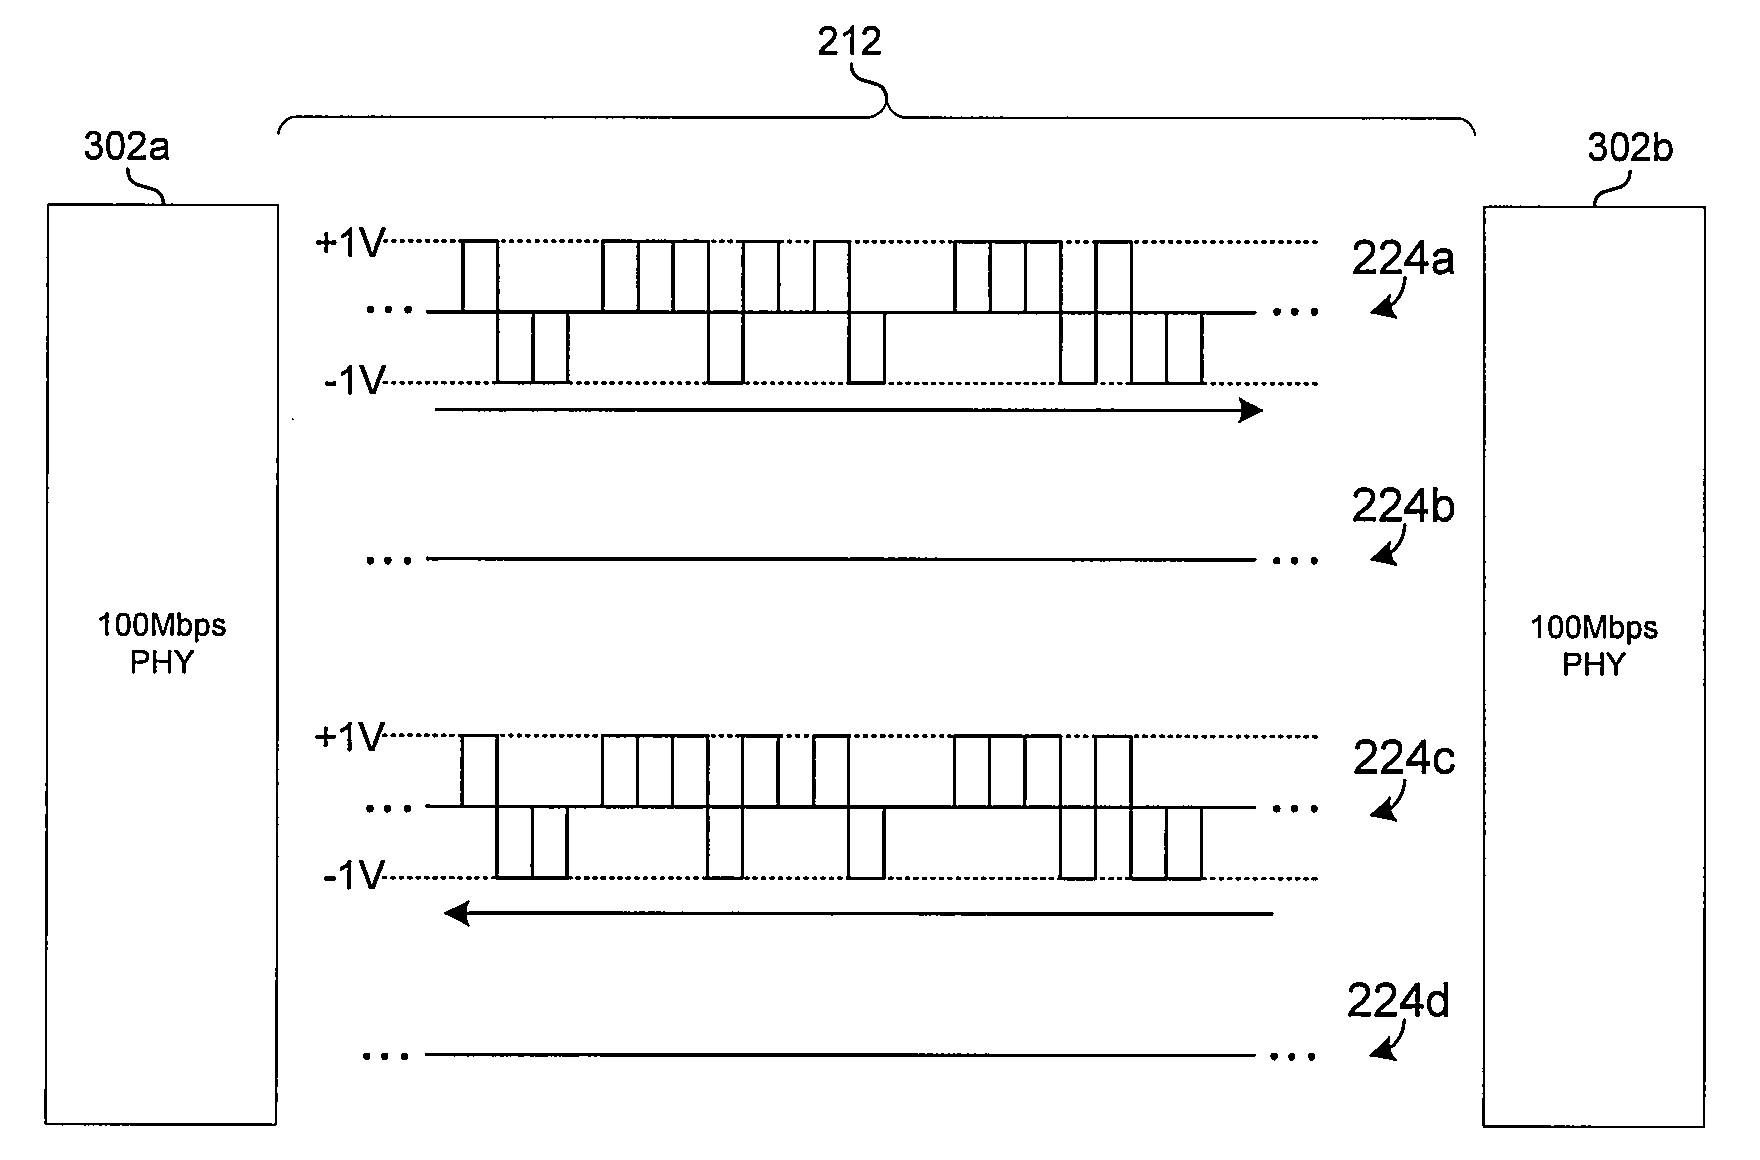 Method And System For Energy Efficient Signaling For 100MBPS Ethernet Using A Subset Technique